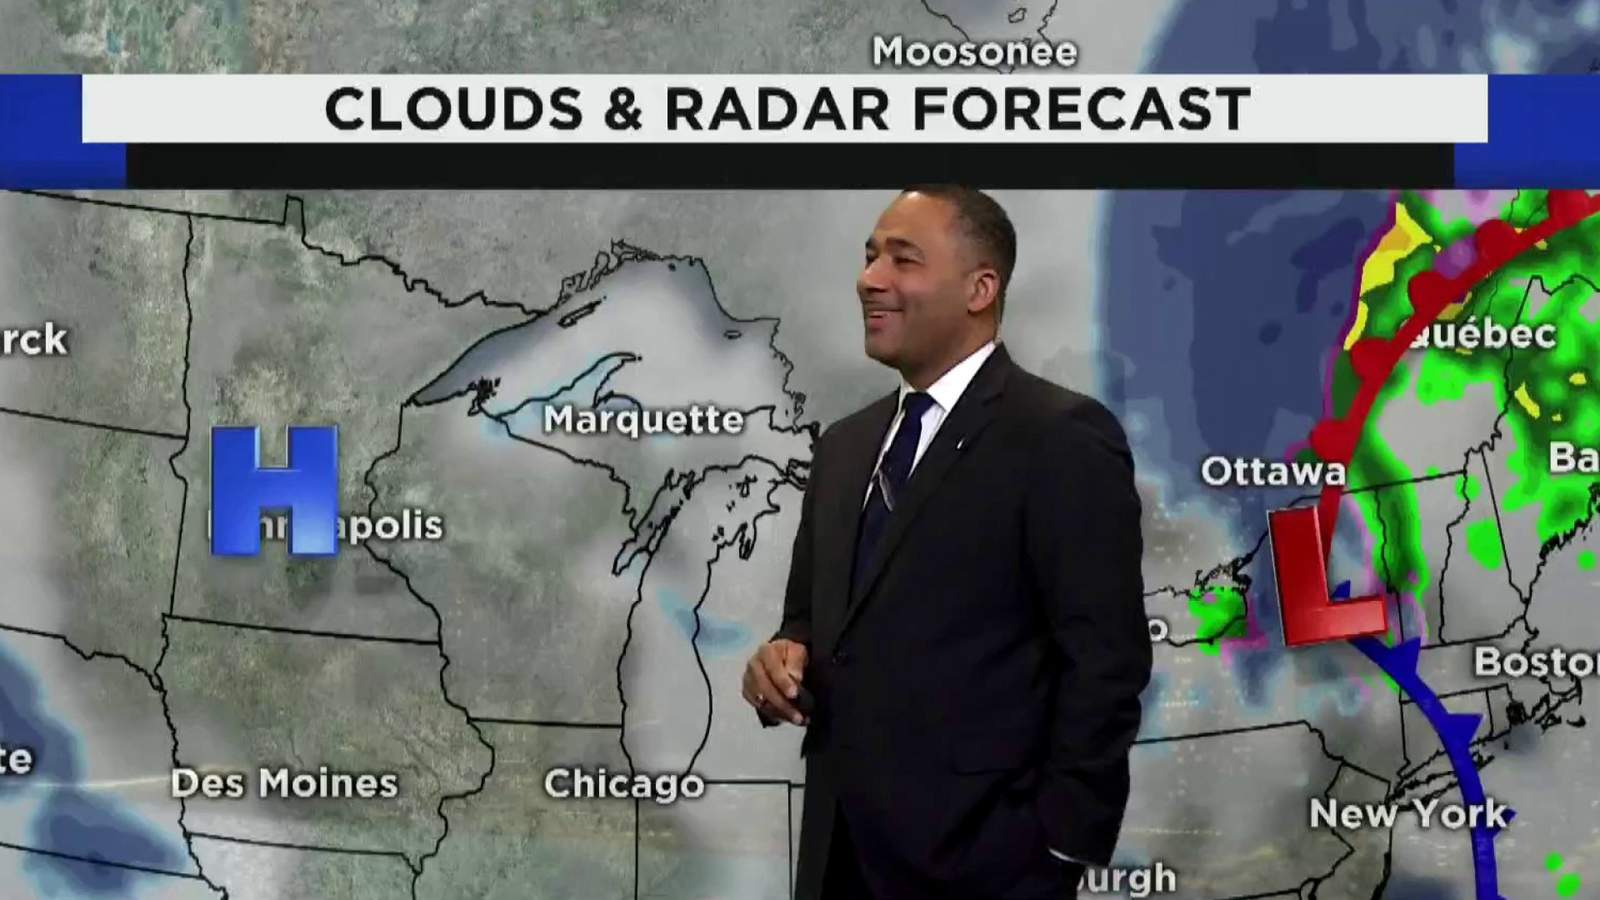 Metro Detroit weather: Mostly cloudy Saturday night with flurries, sprinkles